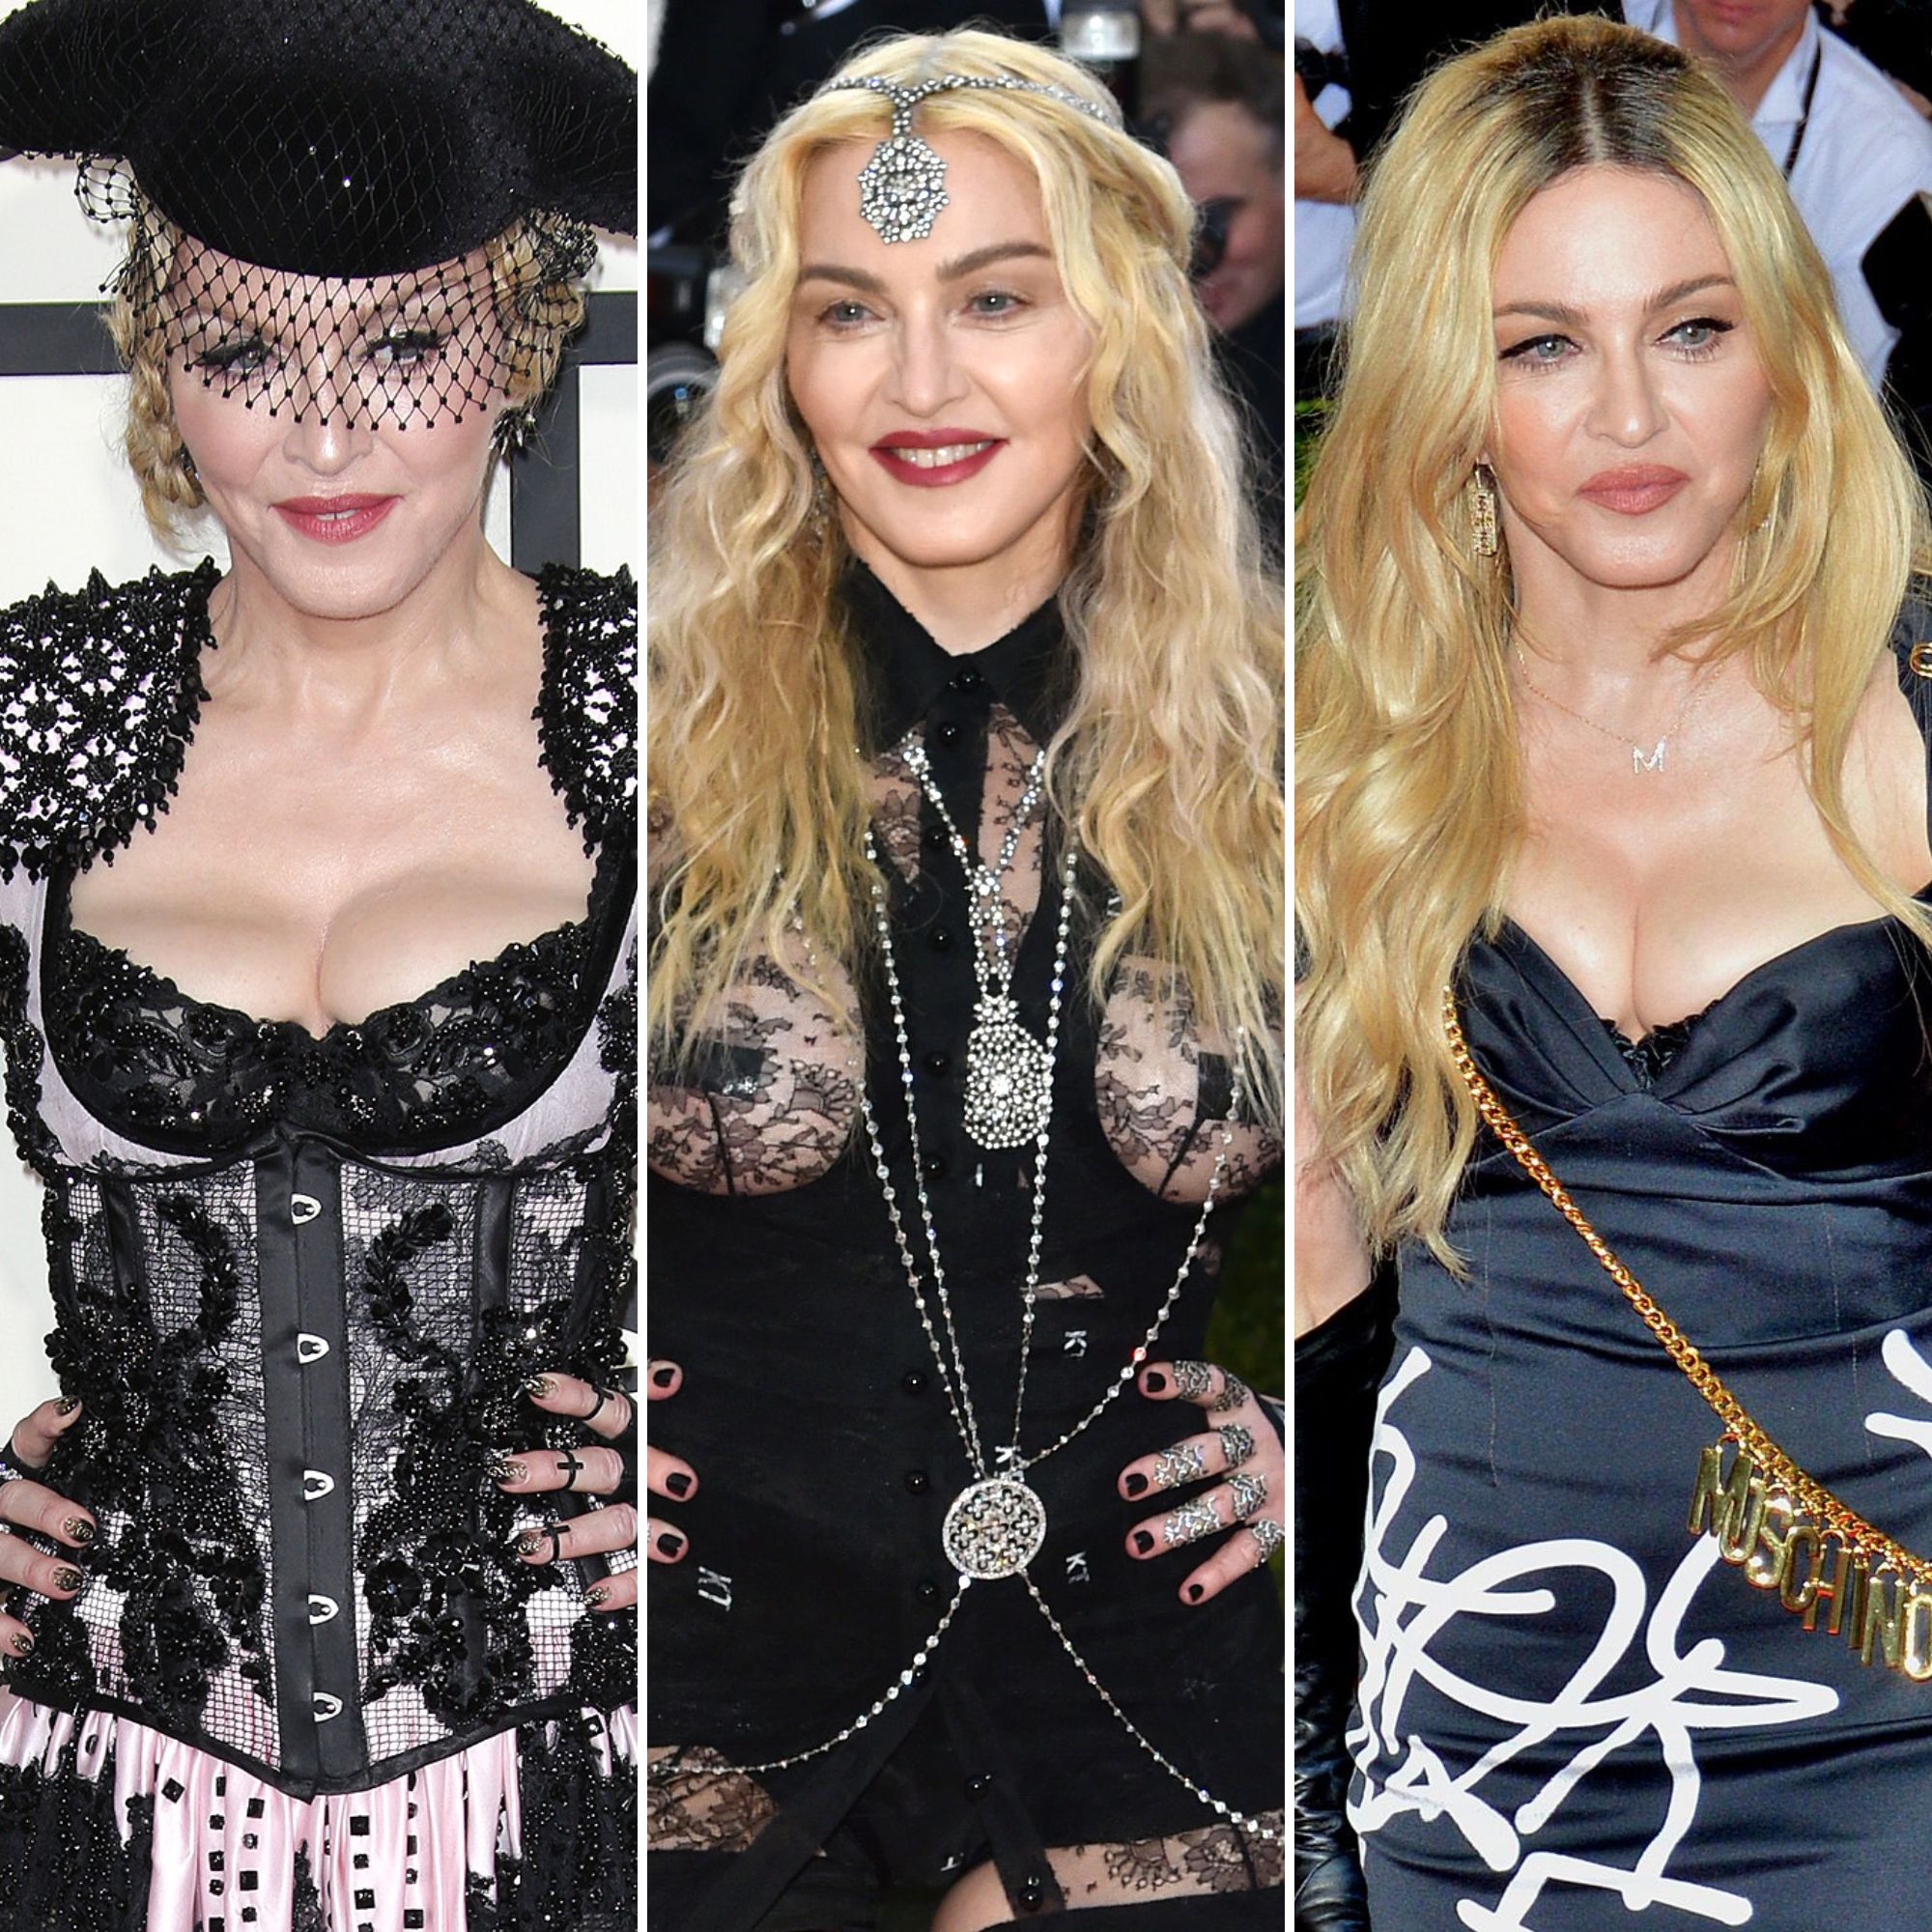 Madonna Braless Photos: Her Sexiest Outfits With No Bra